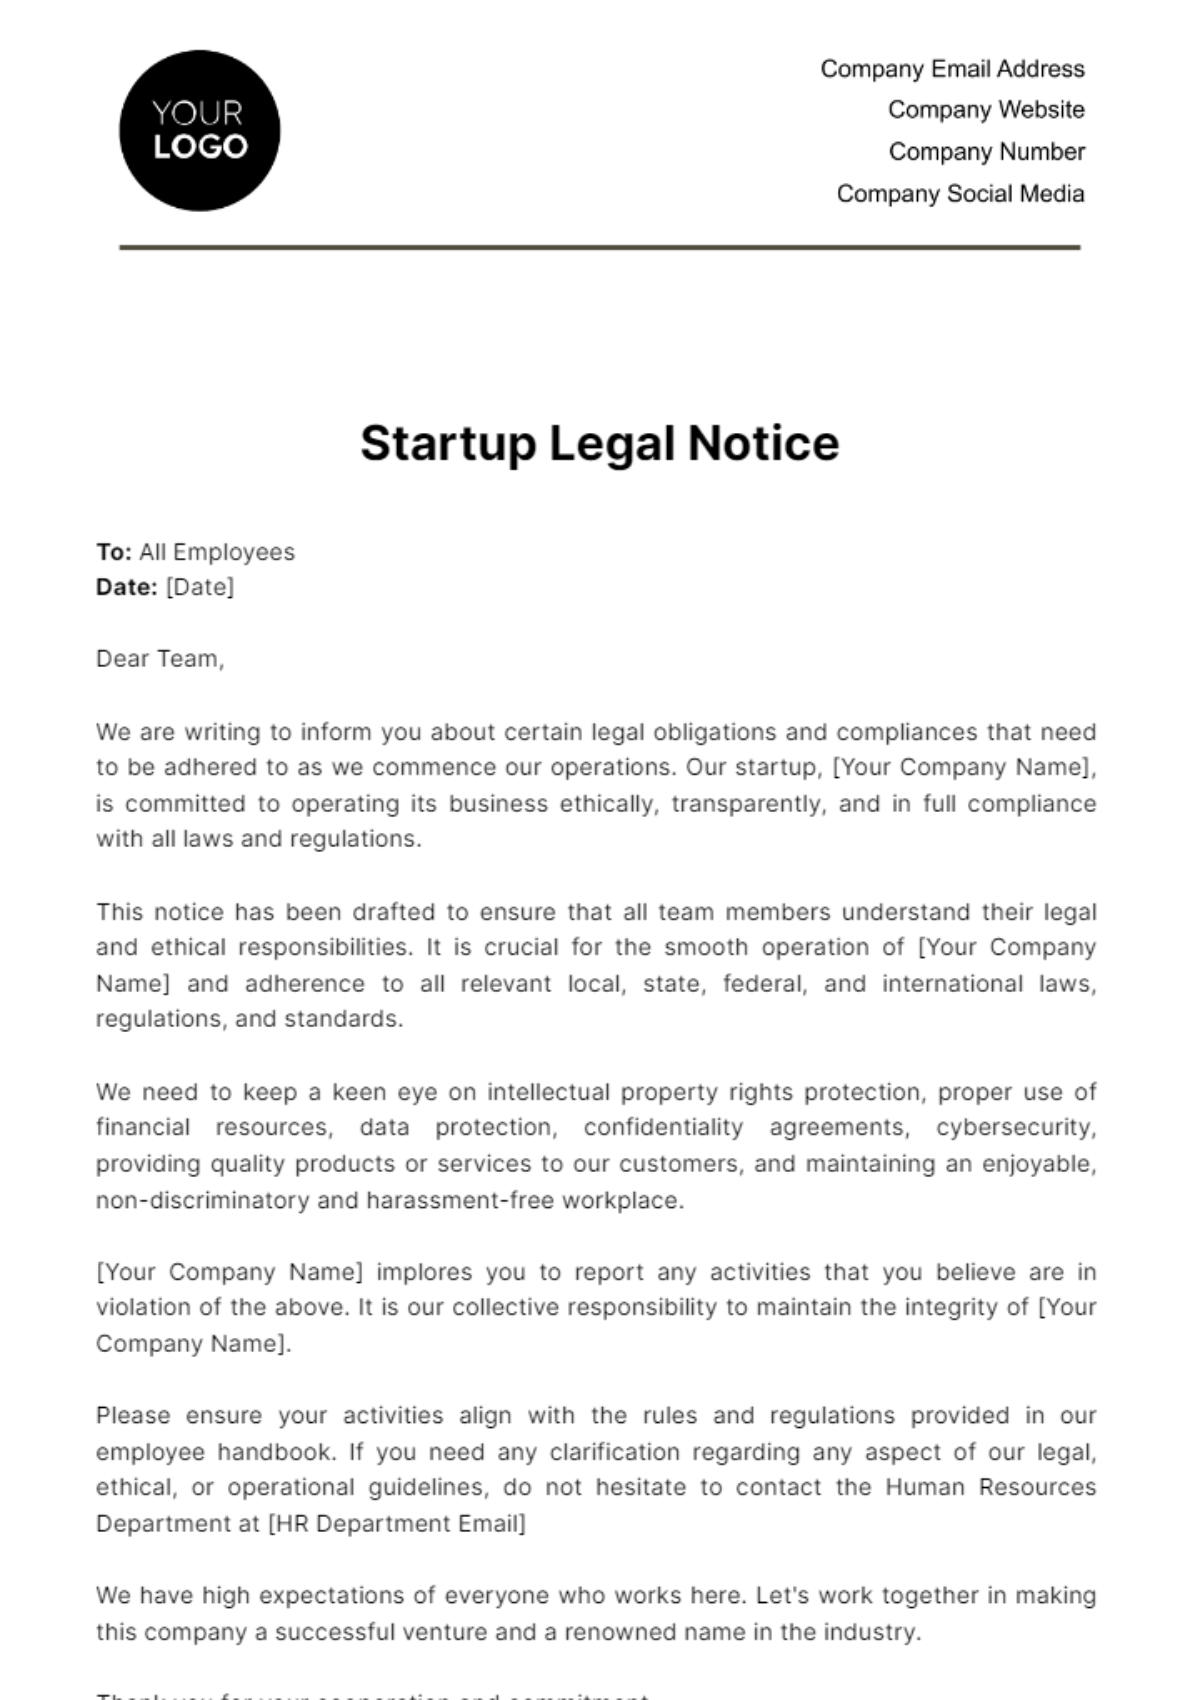 Free Startup Legal Notice Template